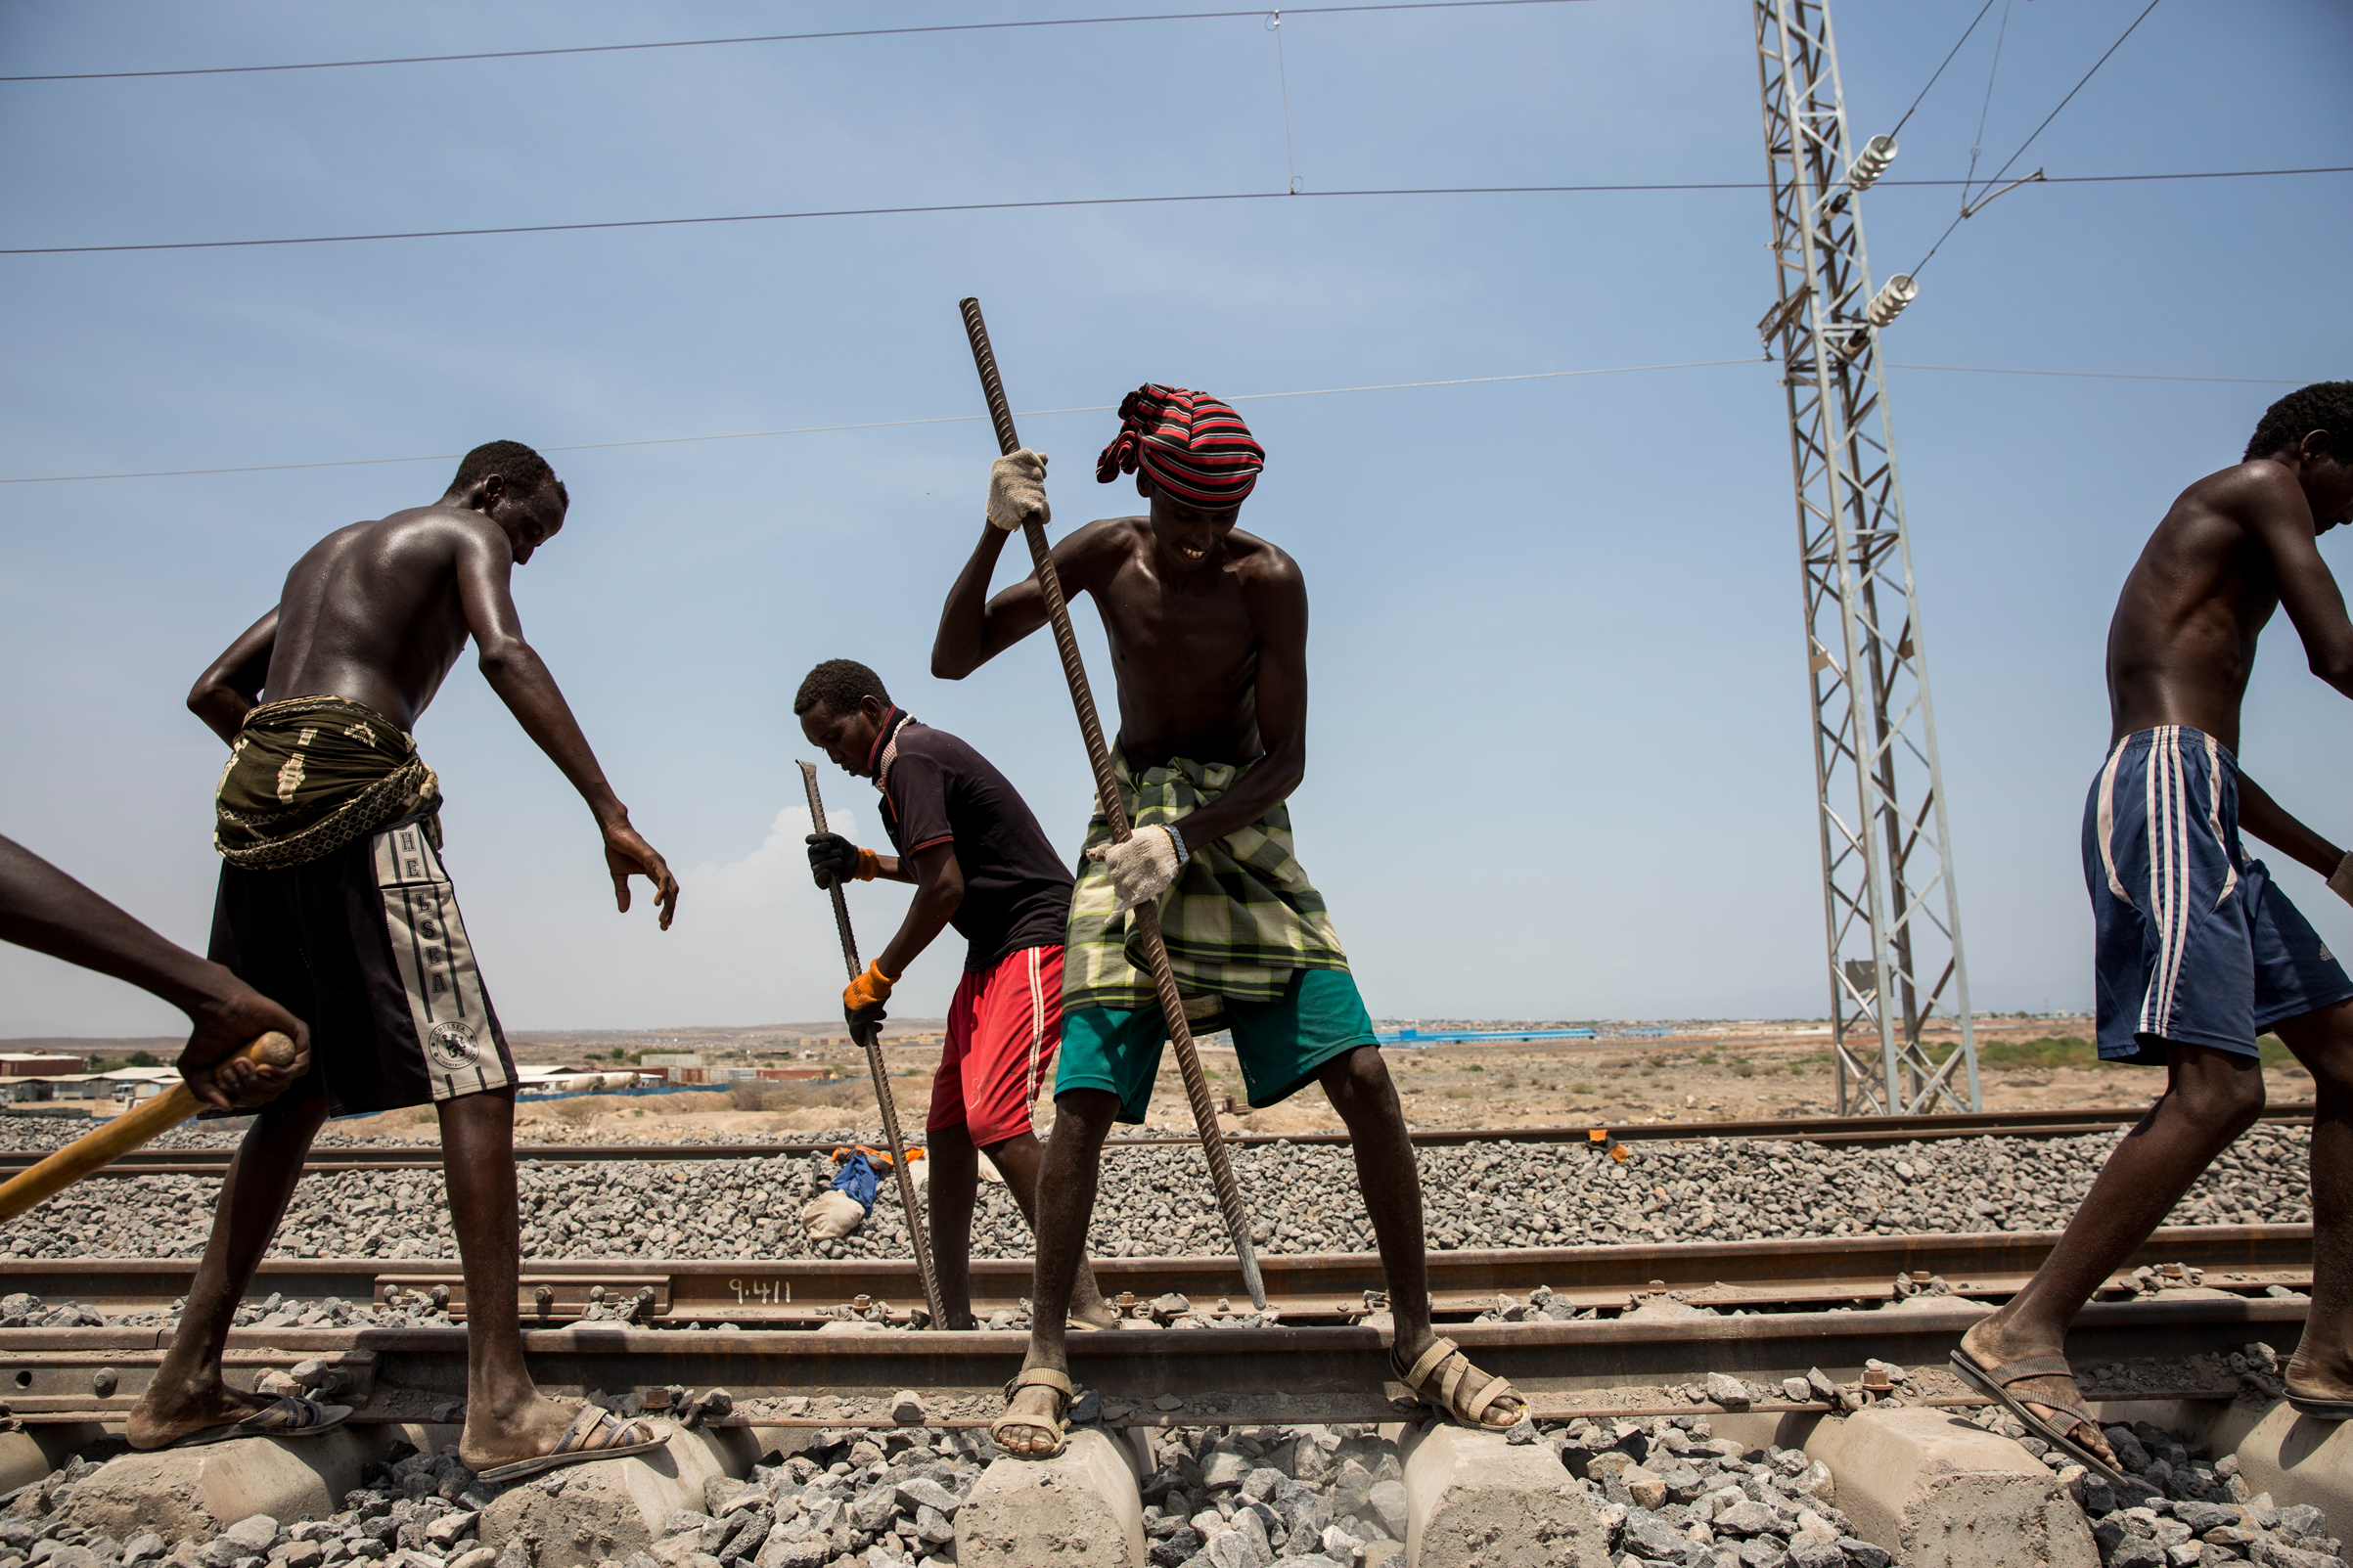 Workers maintain and check the Addis Ababa-Djibouti railway during a trial run in Addis Ababa, Ethiopia, on Sept. 28, 2016. Days later, after four years of construction and funding by the Chinese, it opened to become Africa's first cross-border electric railway. (ImagineChina/AP)